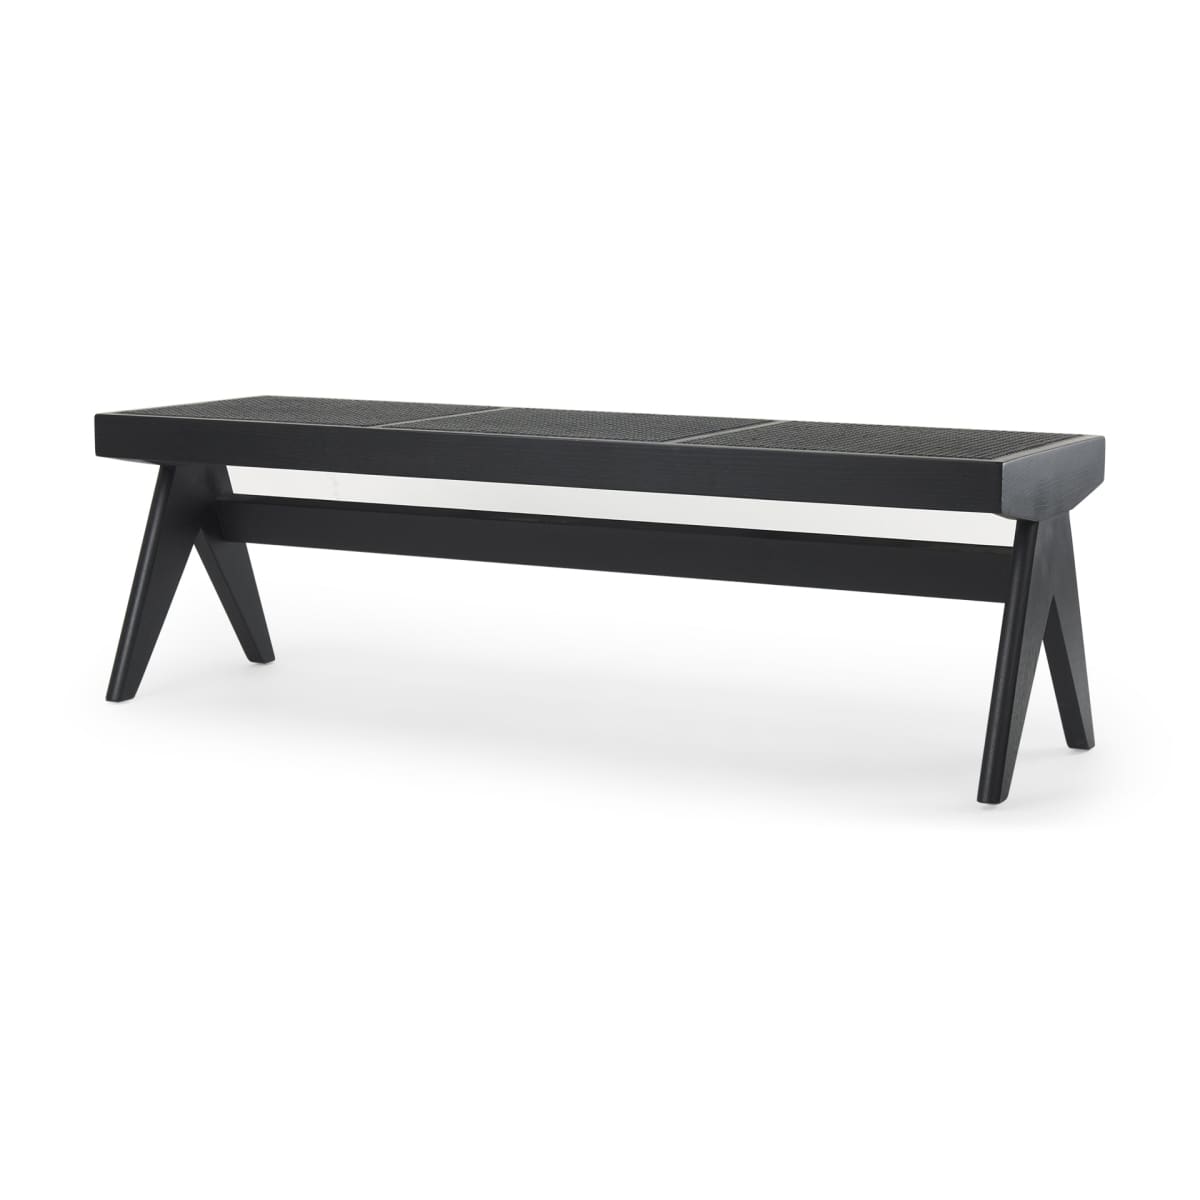 Arvin Bench Black Wood - benches